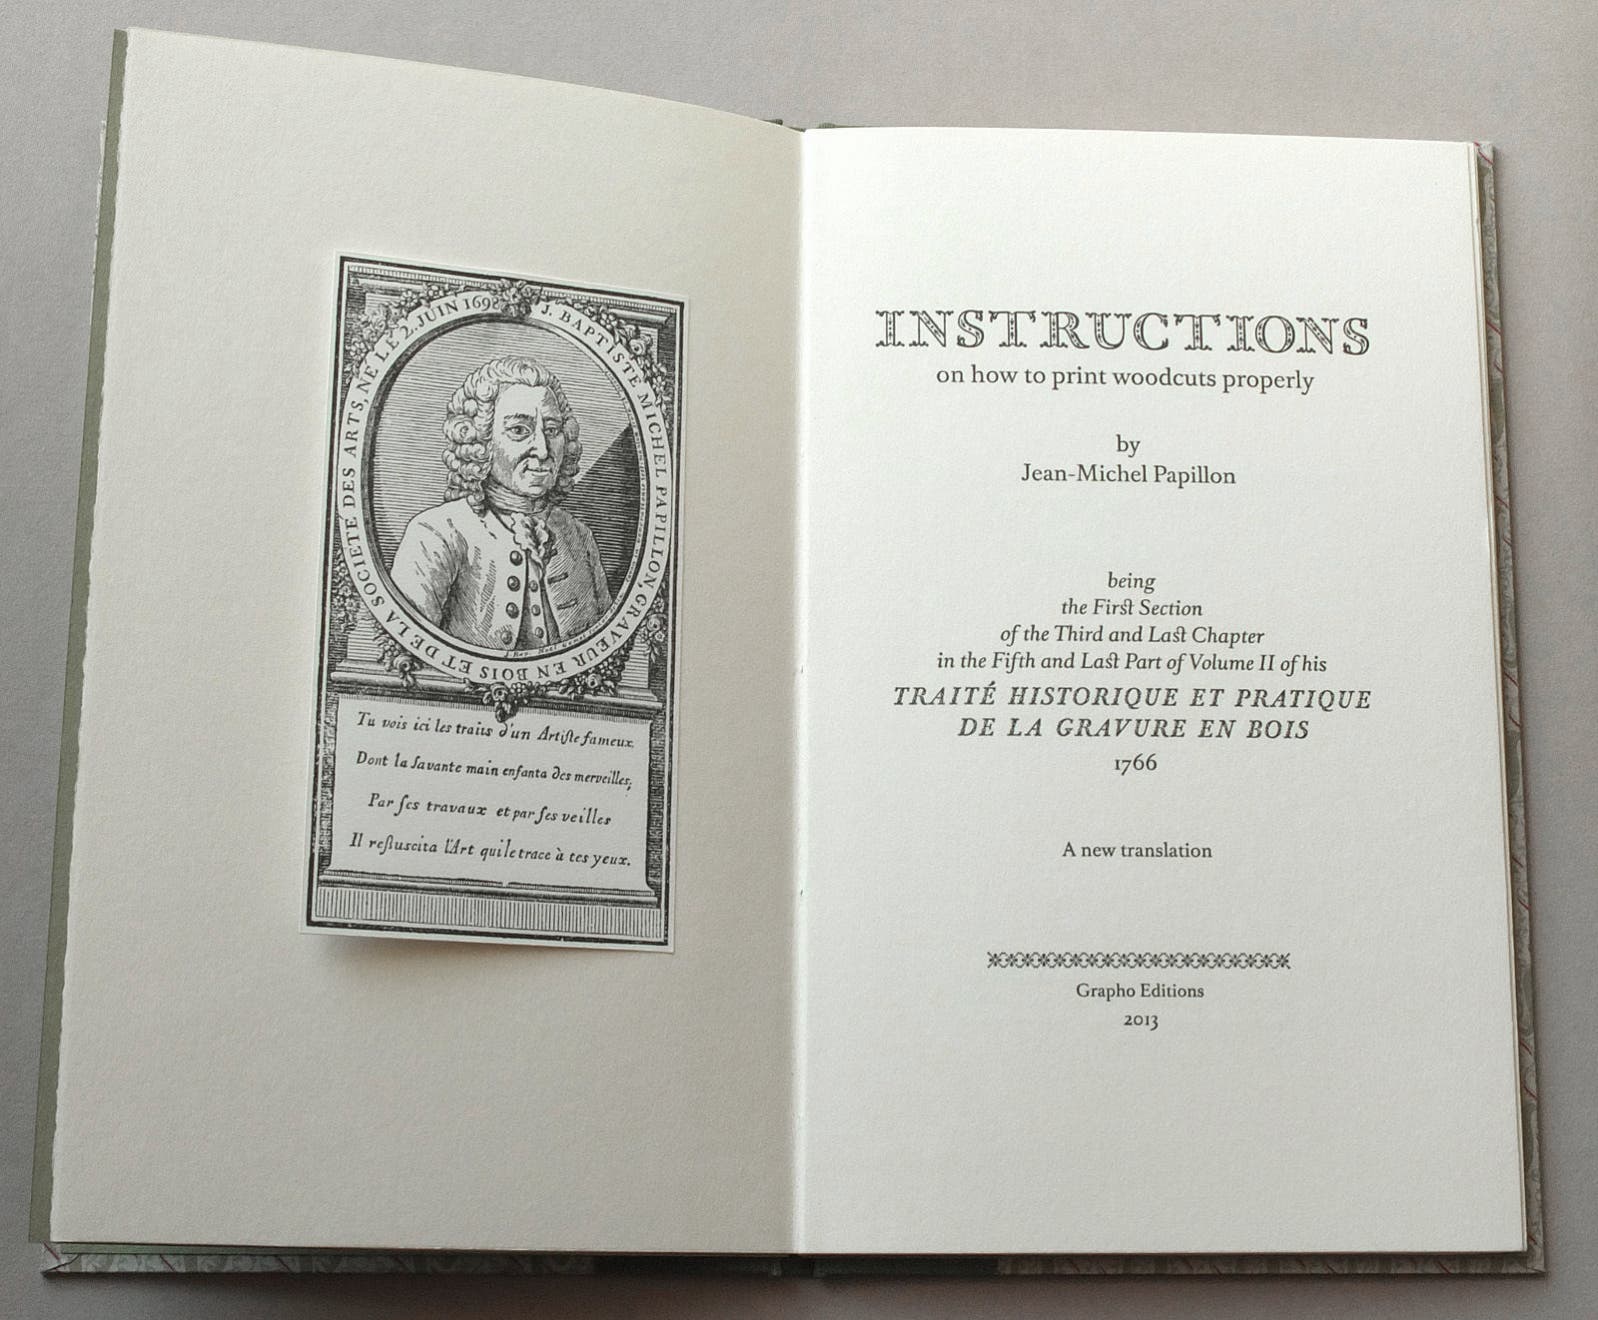 Title Page spread